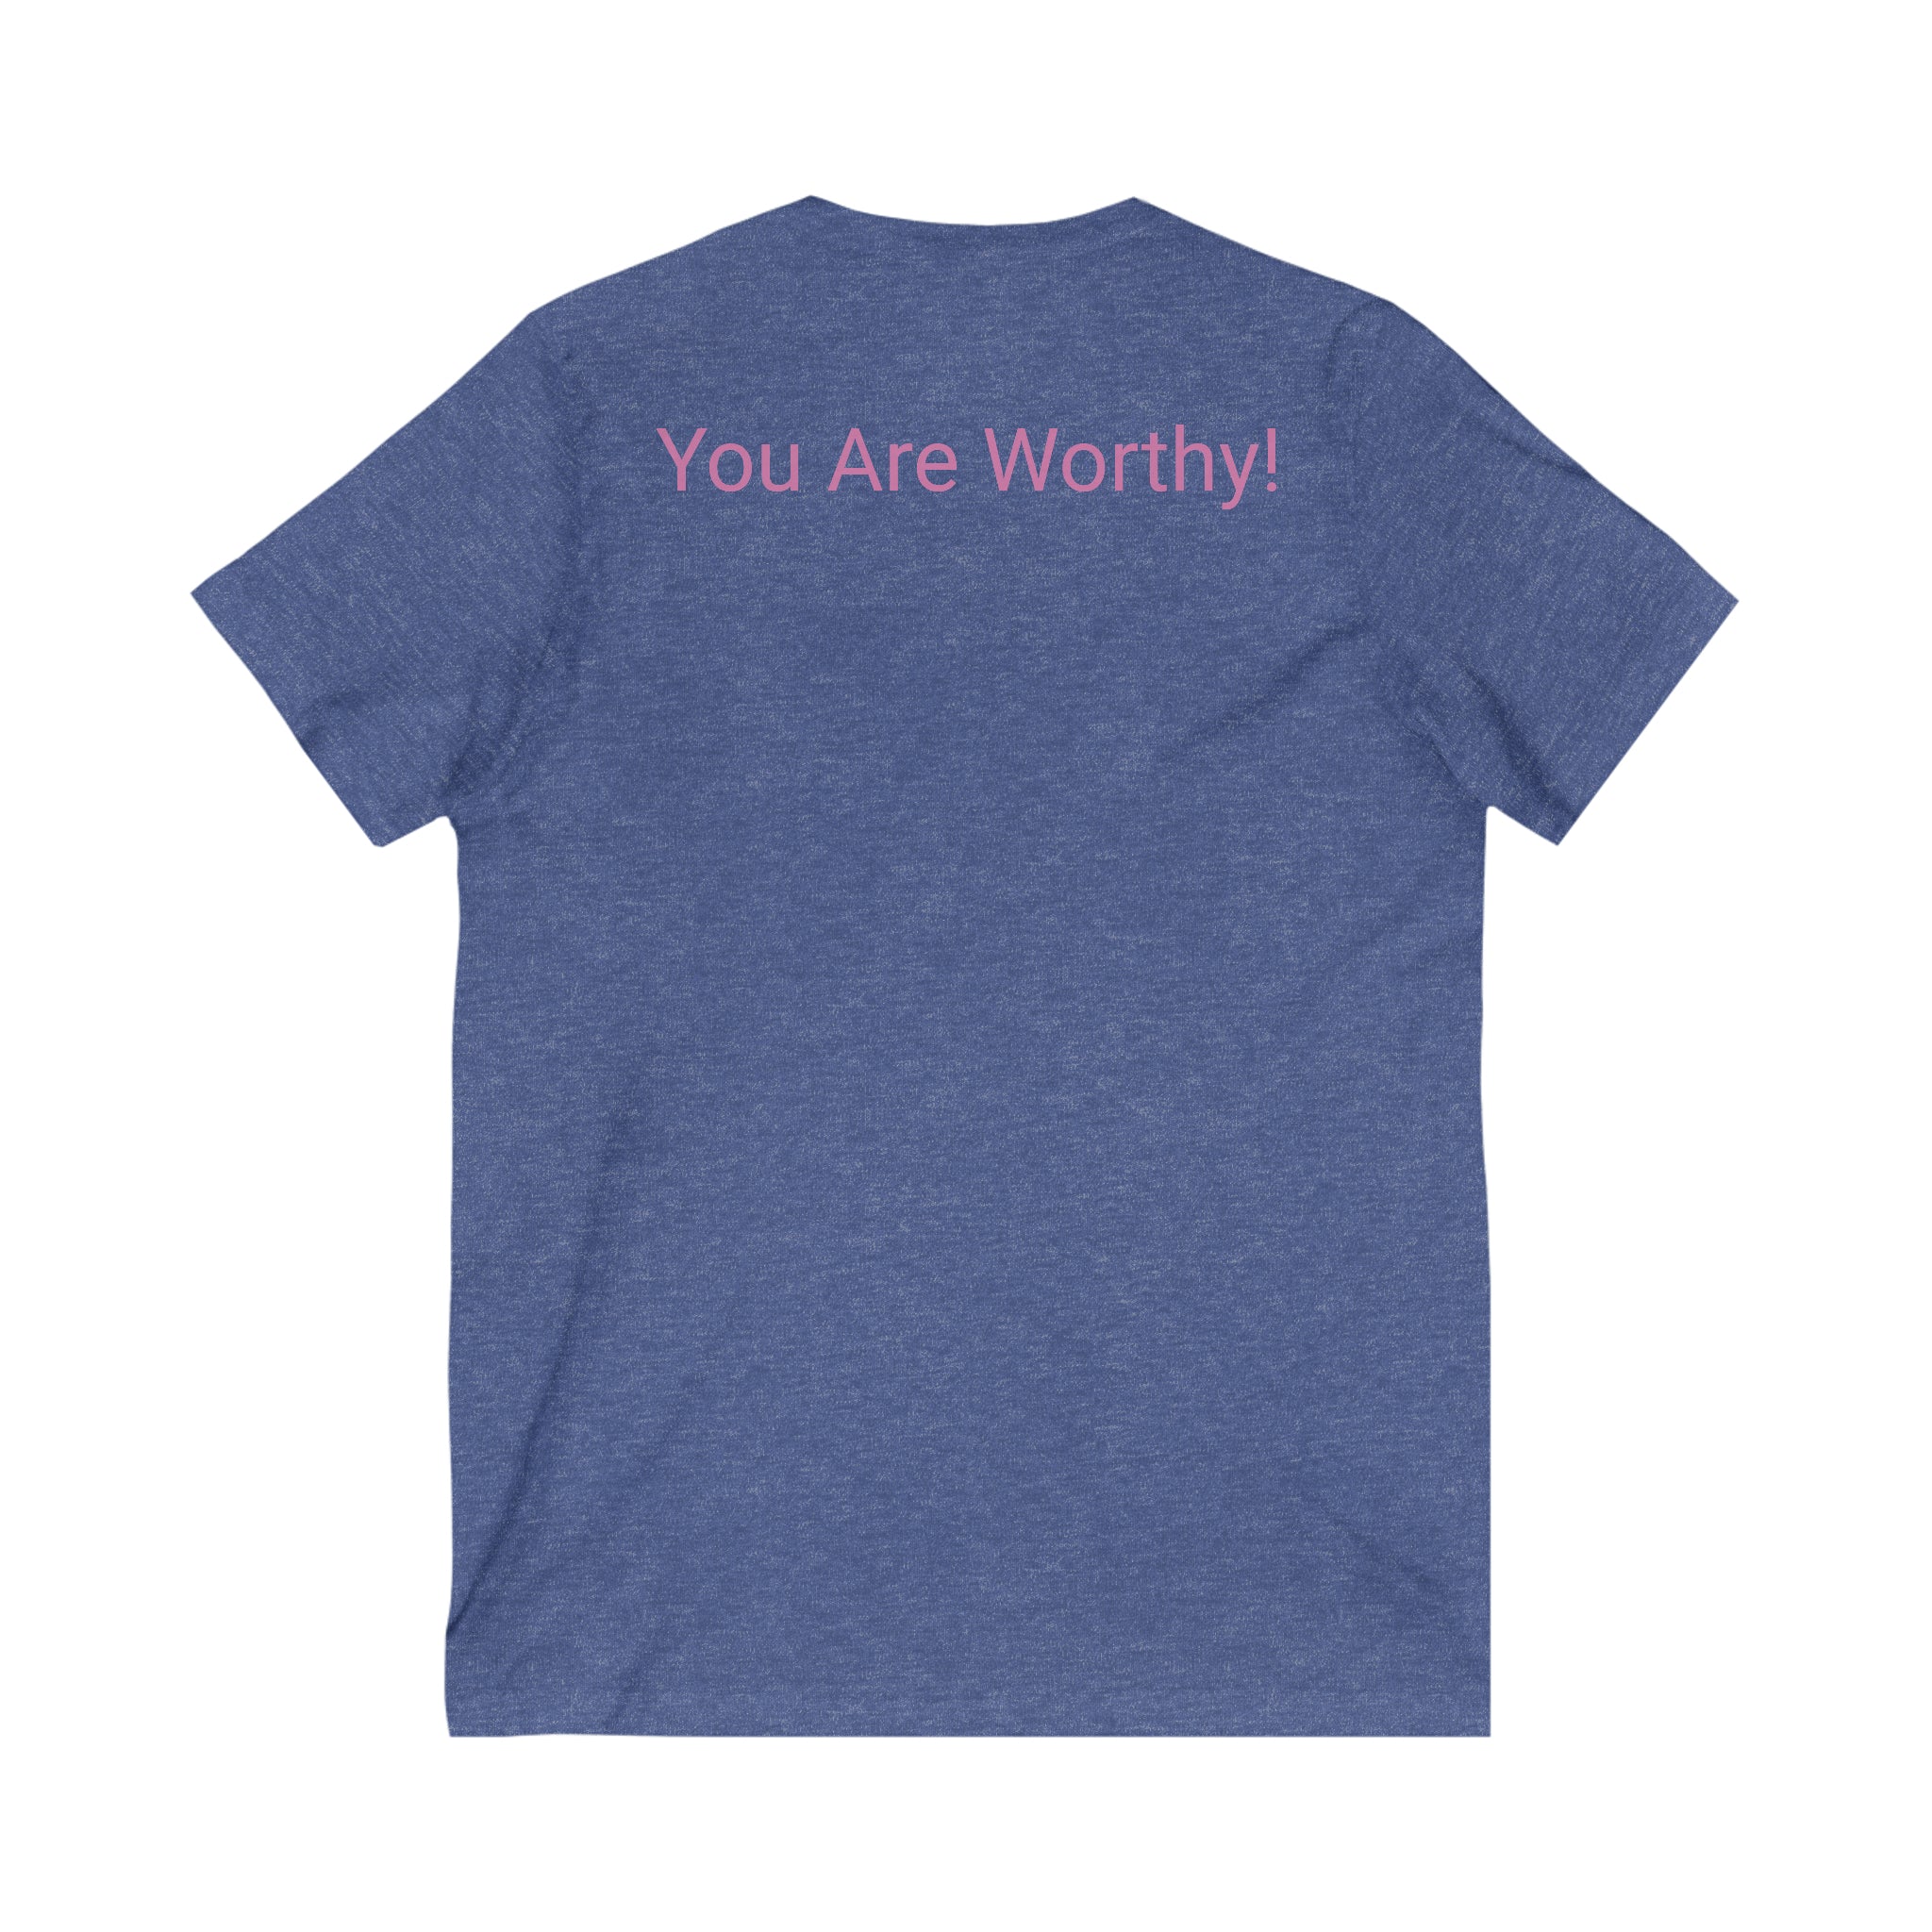 You Are Worthy! V-Neck T-Shirt Heather True Royal Athleisure Wear Casual Hoodie Comfort Hoodie Cozy Hoodie Graphic Hoodie Hooded Sweatshirt Hoodie Men's Hoodie Pullover Hoodie Women's Hoodie V-neck 16532033220896327232_2048_f9c98aff-516e-45f2-a077-9a81b9c2cf7e Printify